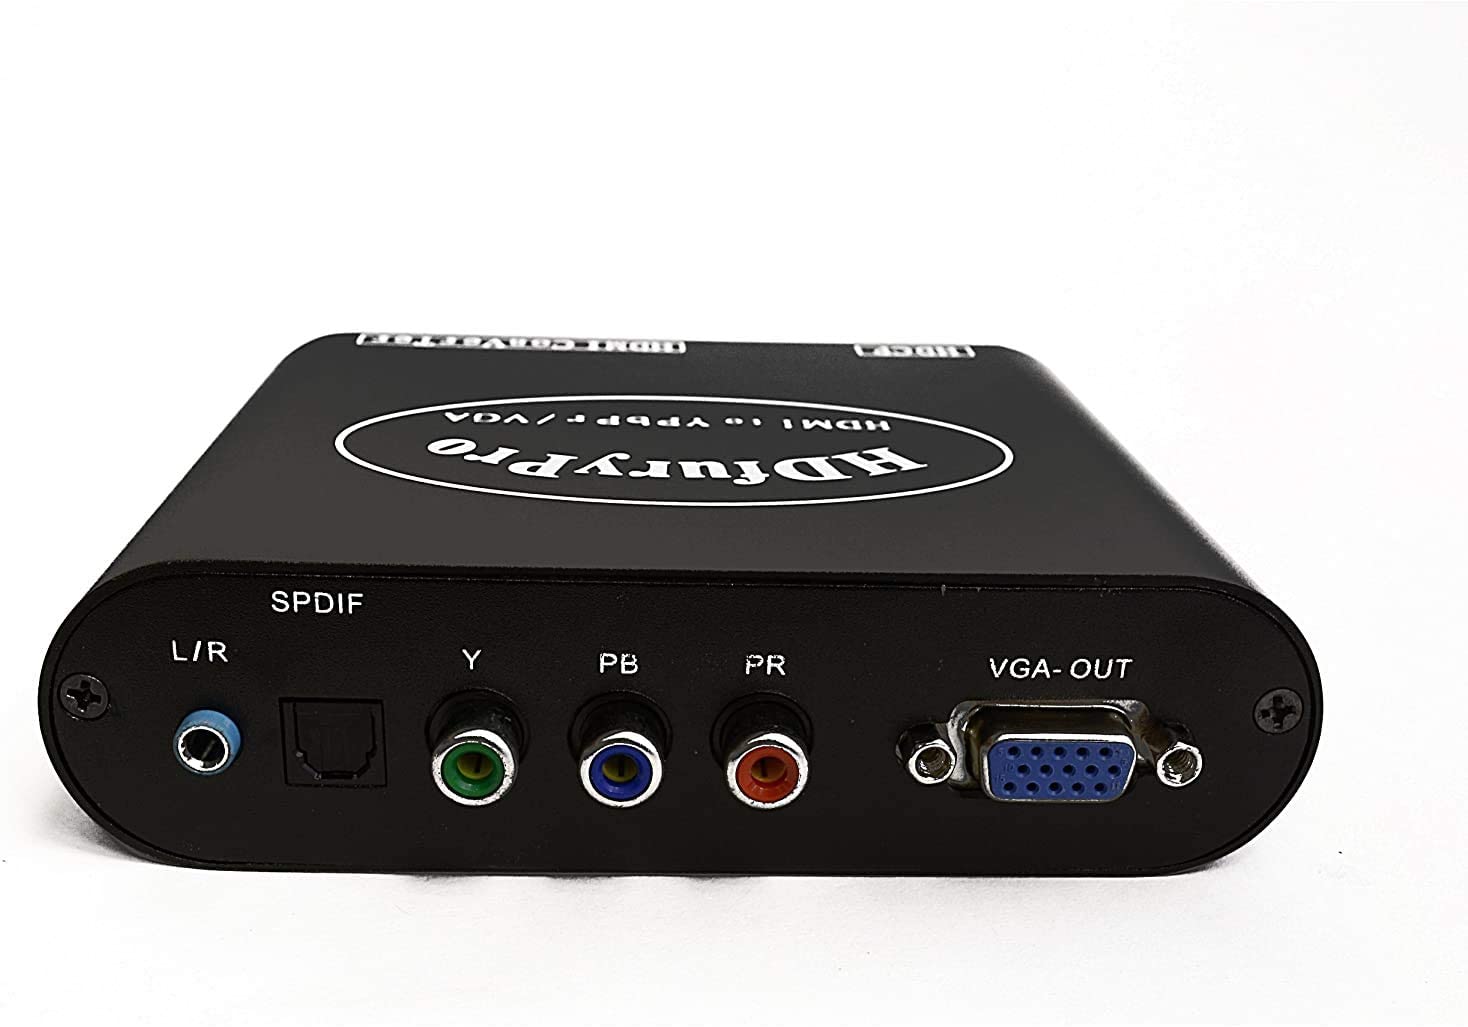 XD-450 - HDMI to YPbPr/VGA Converter Dual 2 HDMI Input to Analog Component Scaler Video 3.5 Audio Out for PC Laptop Xbox PS4 PS3 TV VHS VCR Camera DVD - image 2 of 2